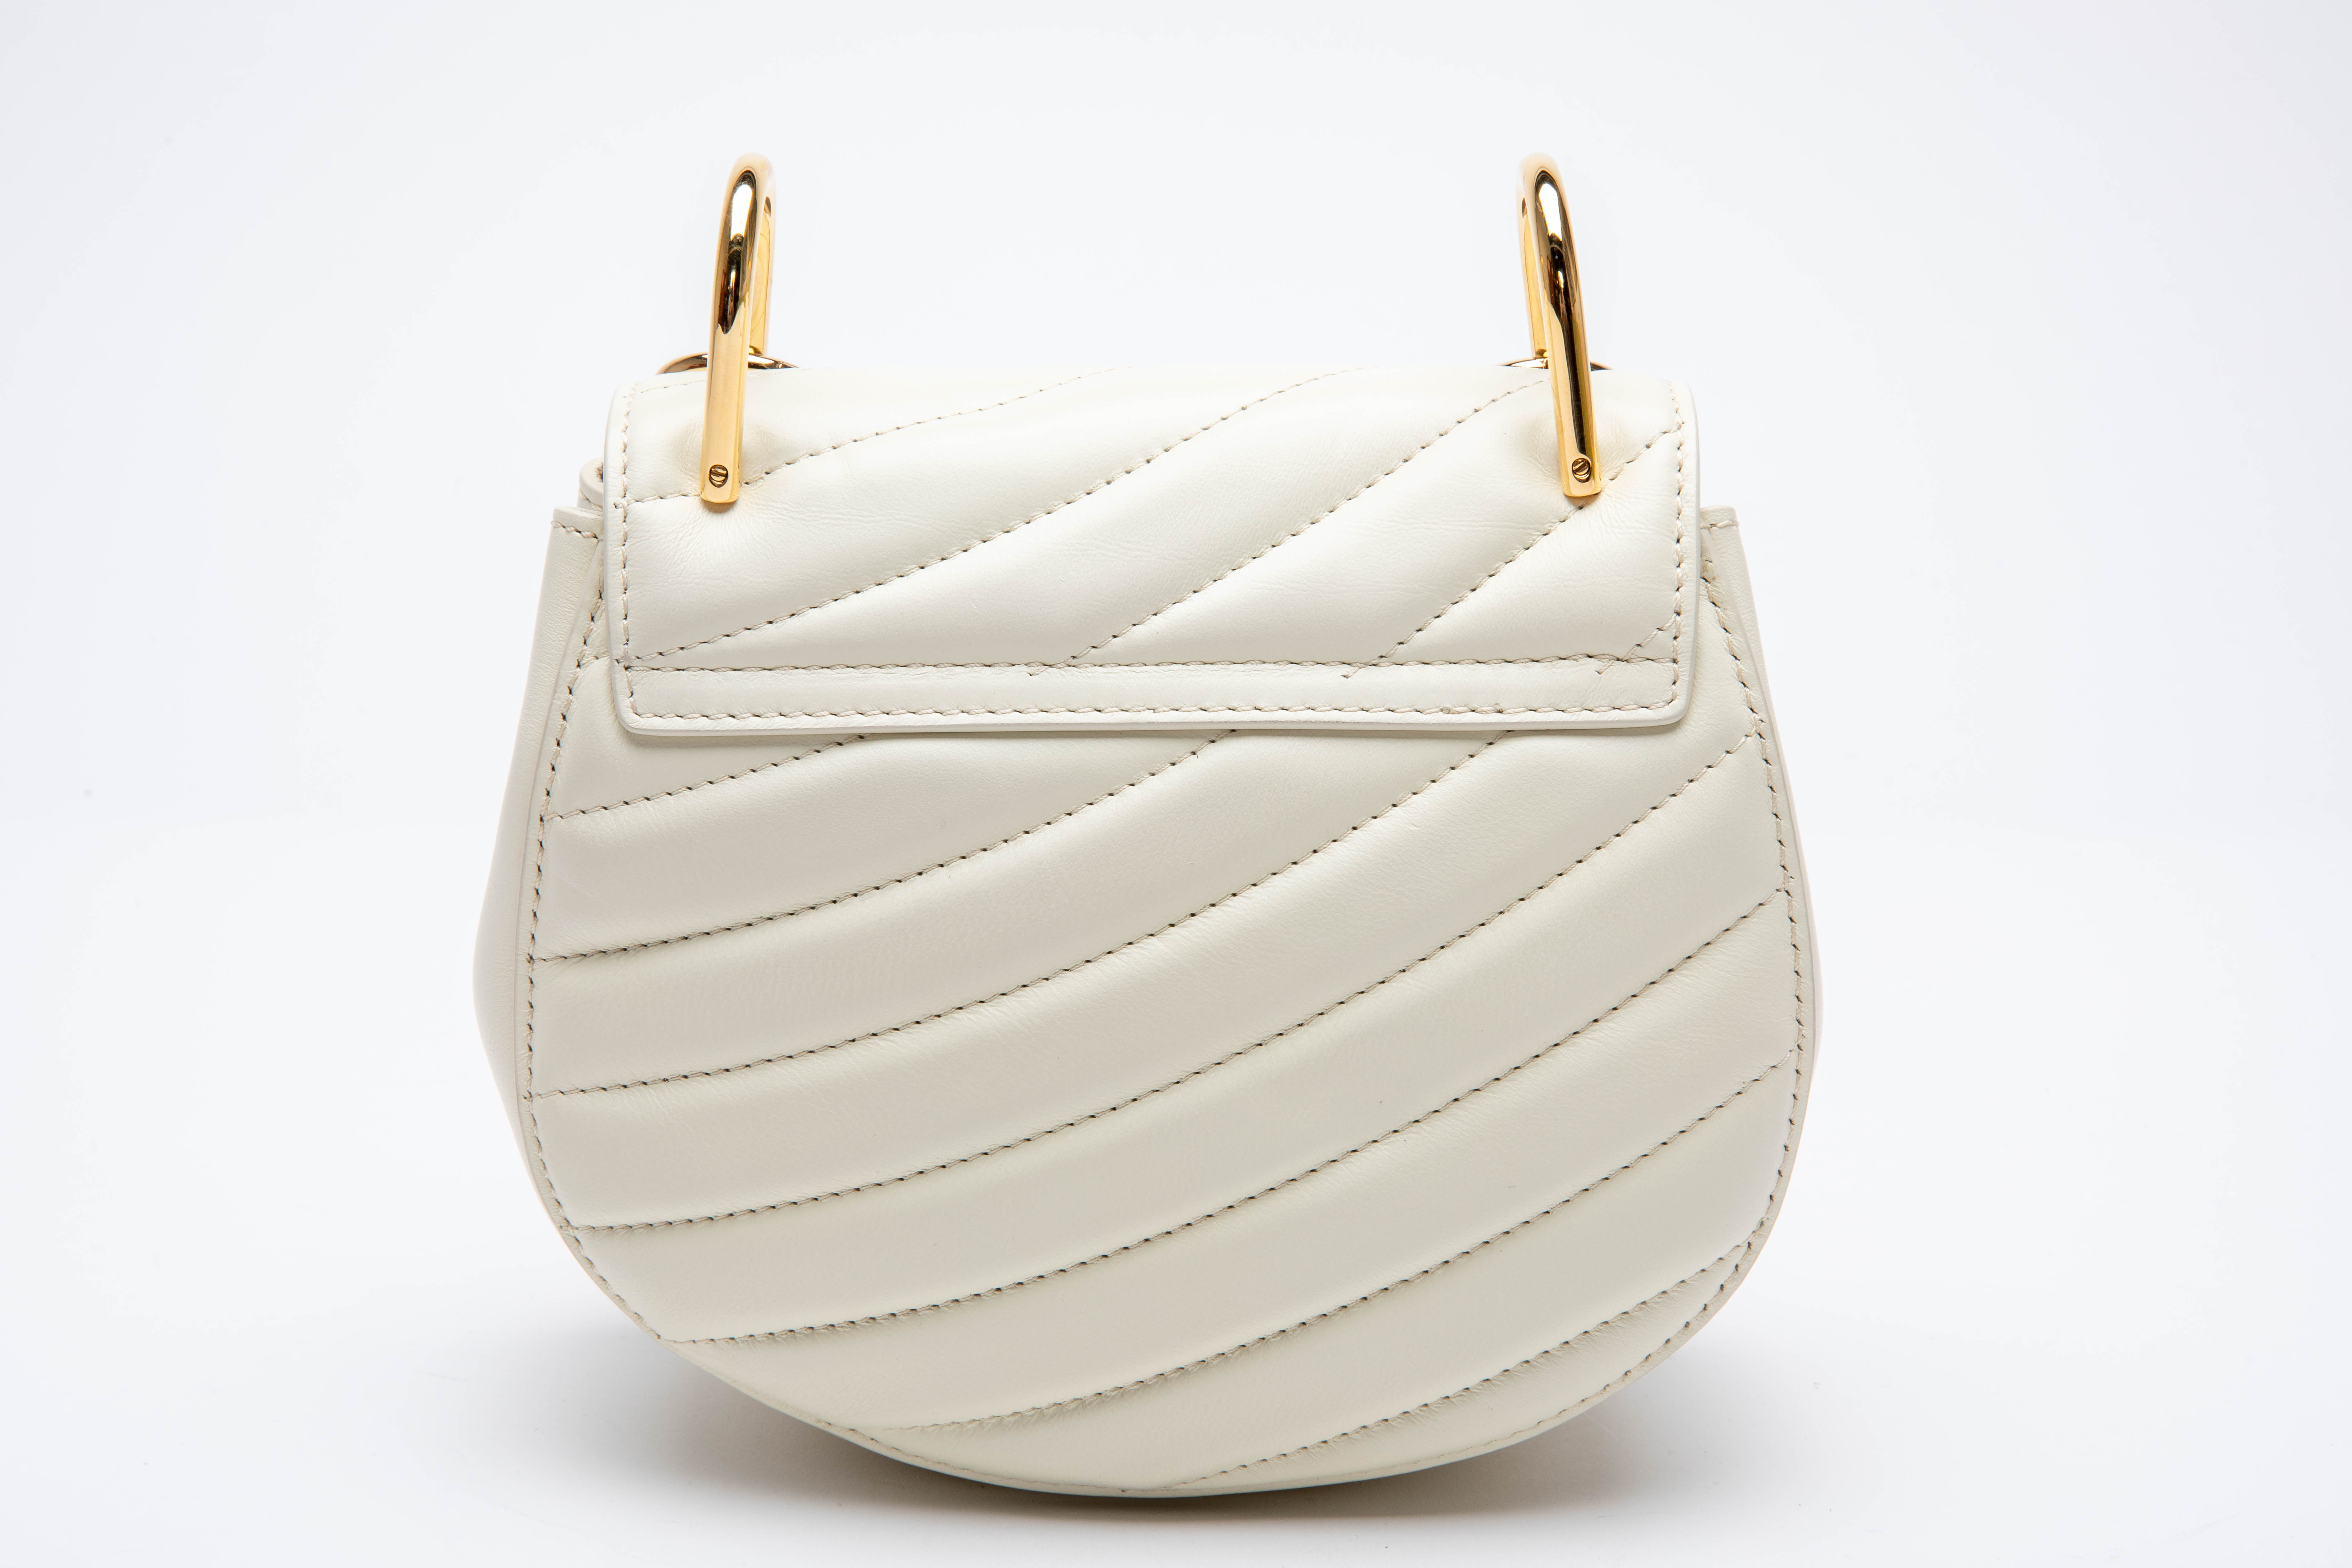 A CHLOE DREW BIJOU QUILTED WHITE LEATHER CROSSBODY BAG - Image 2 of 5